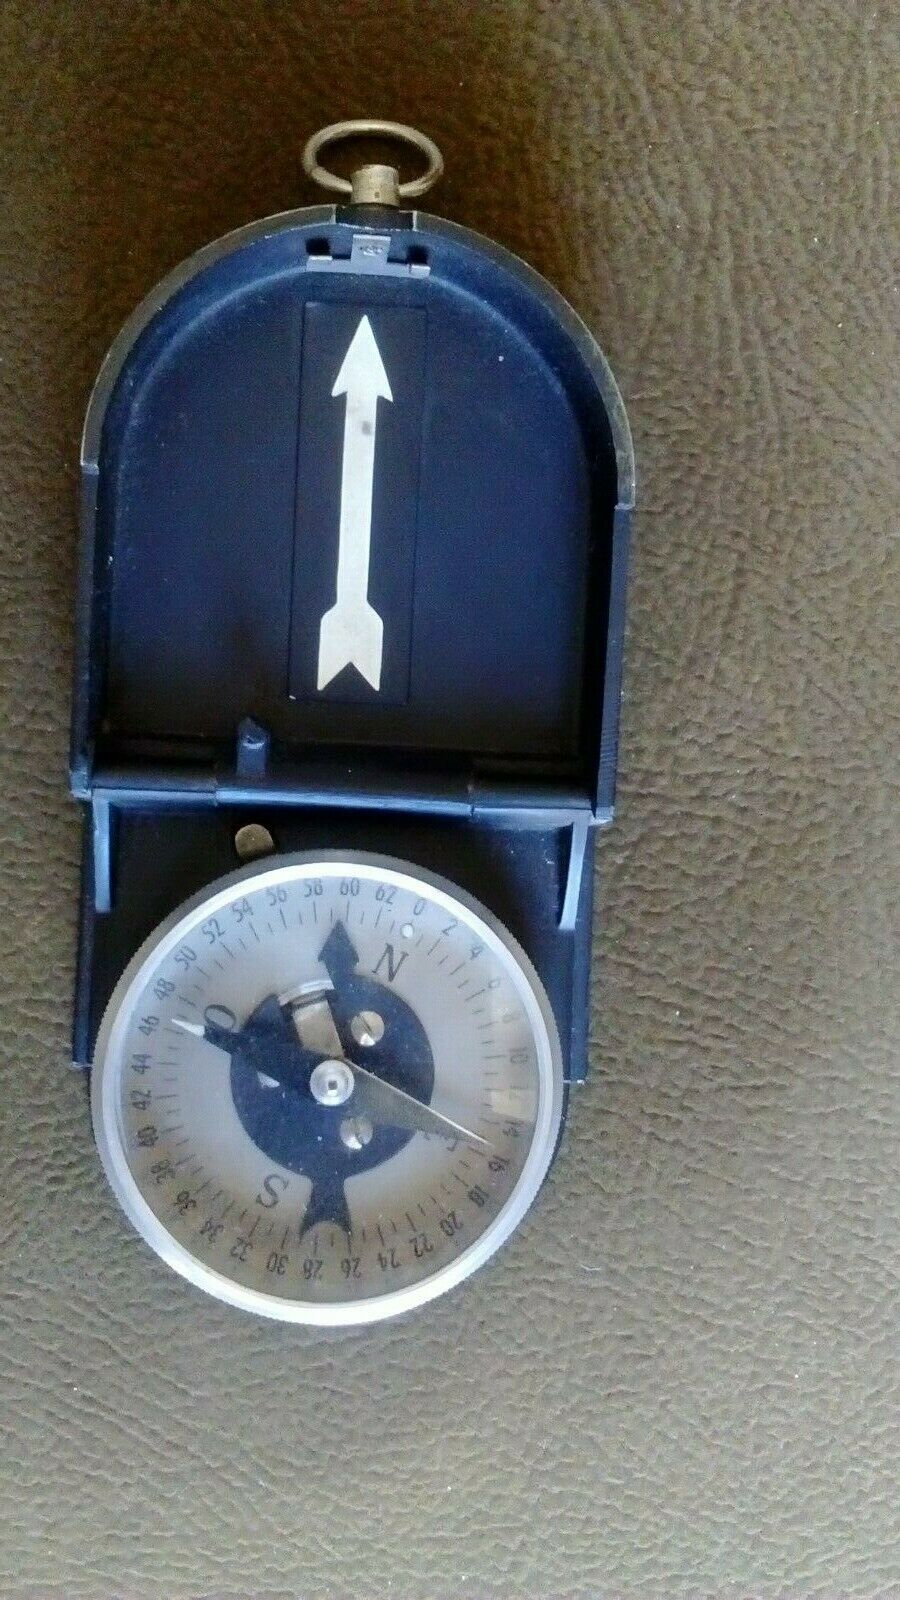 1922 D.L.M COMPASS - FRENCH FOREIGN LEGION